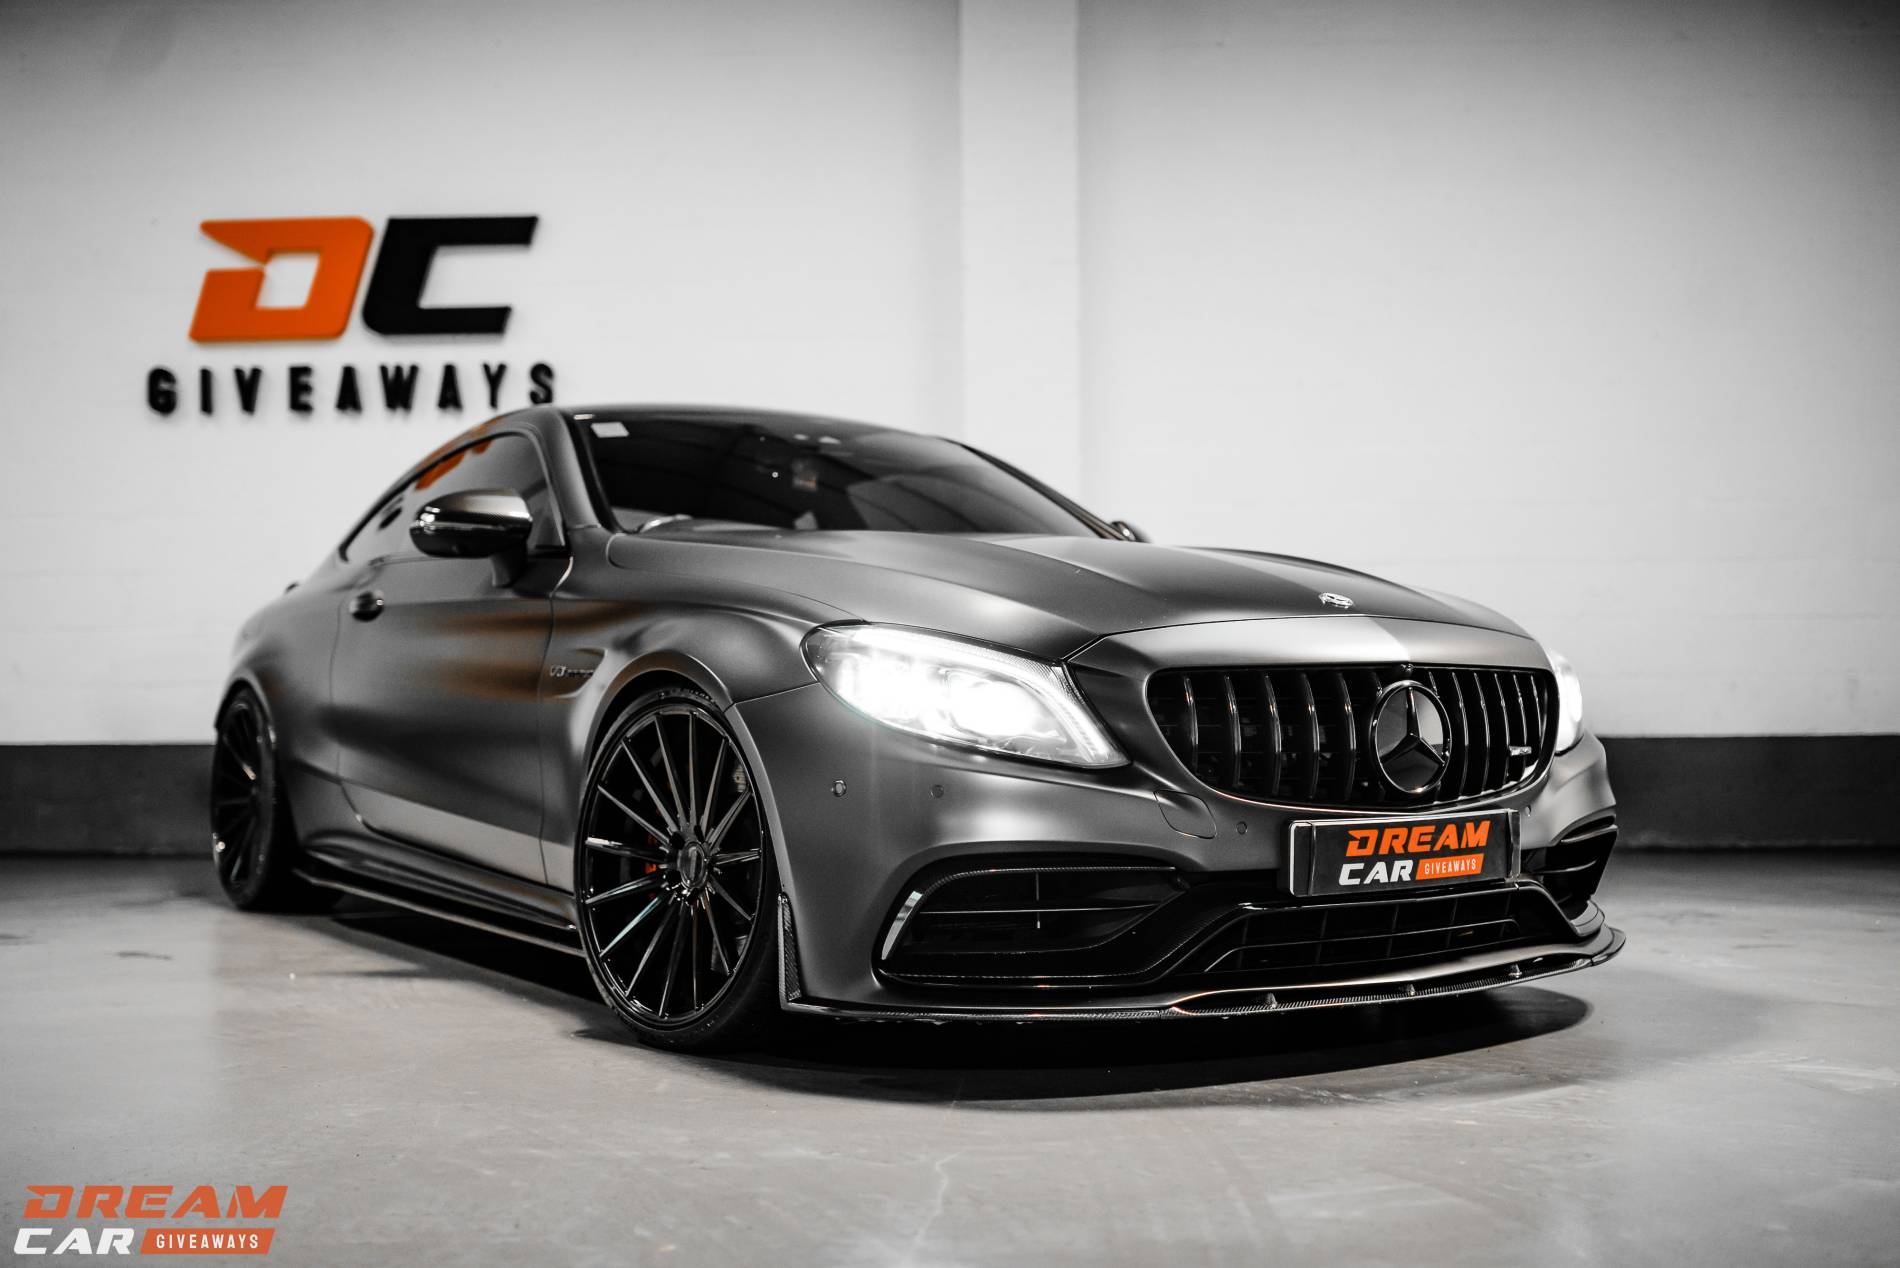 660HP Mercedes-Benz C63S AMG & £1500 or £43,000 Tax Free